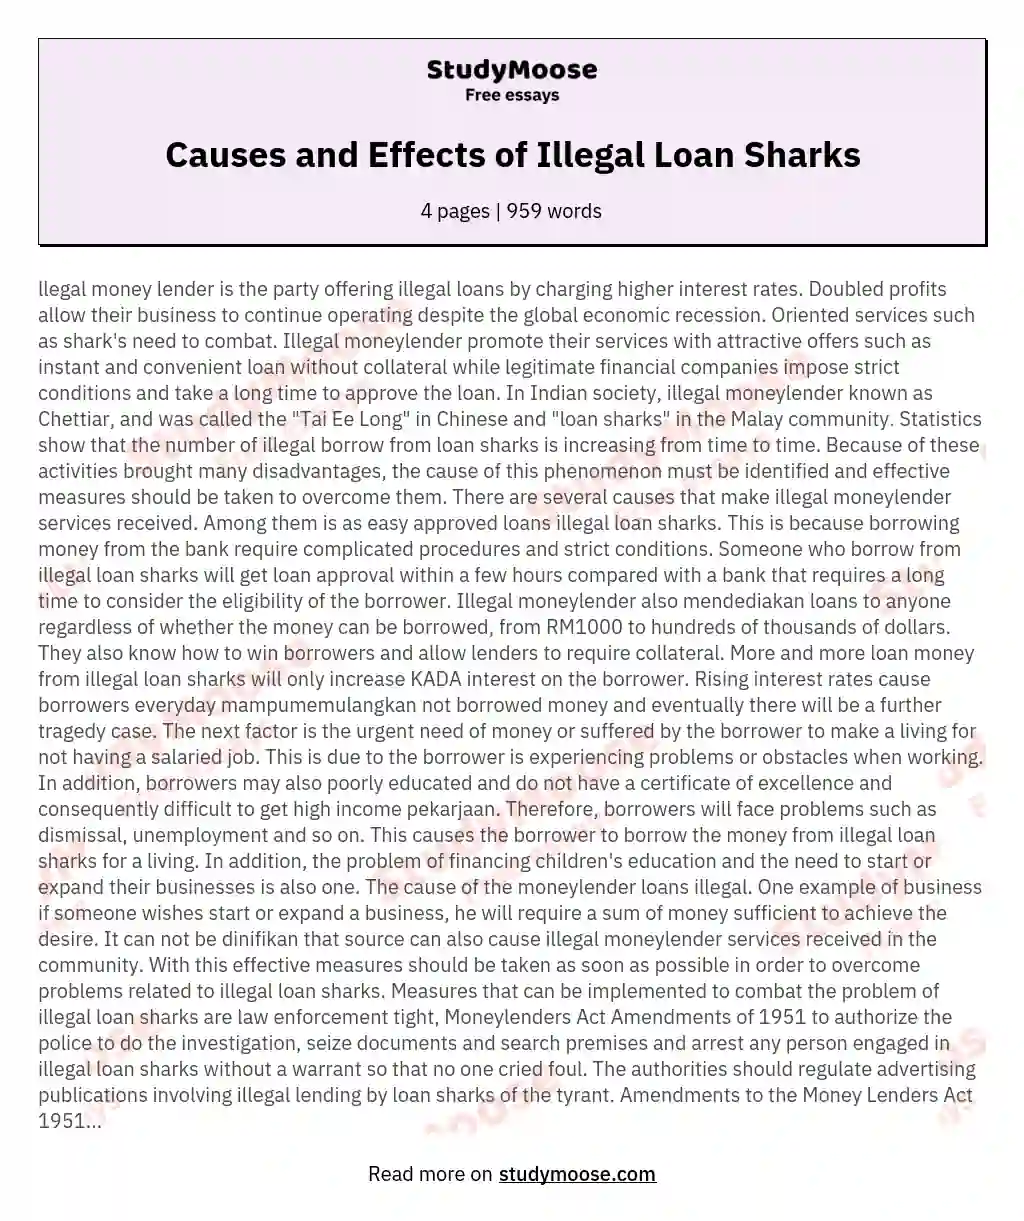 Causes and Effects of Illegal Loan Sharks essay